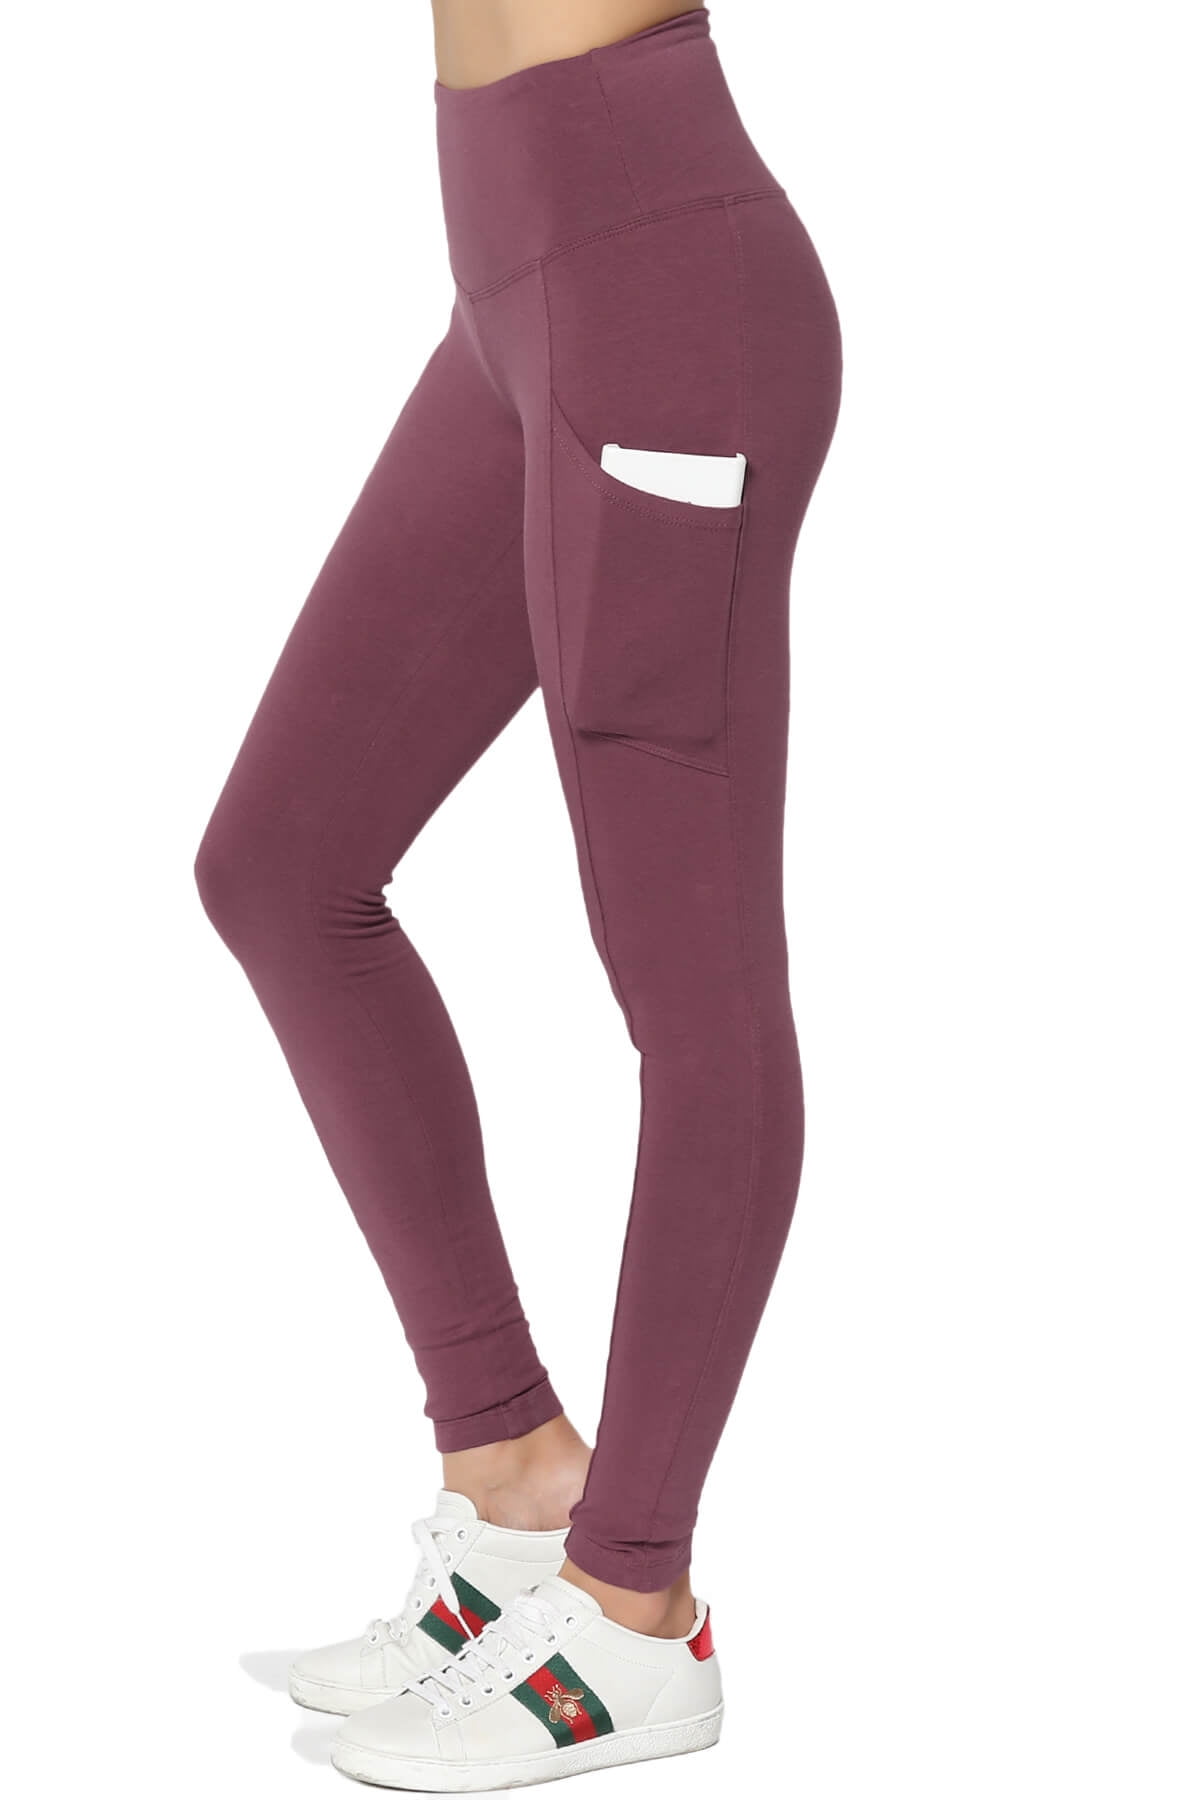 High-Waisted Cotton Leggings with 3 Pockets